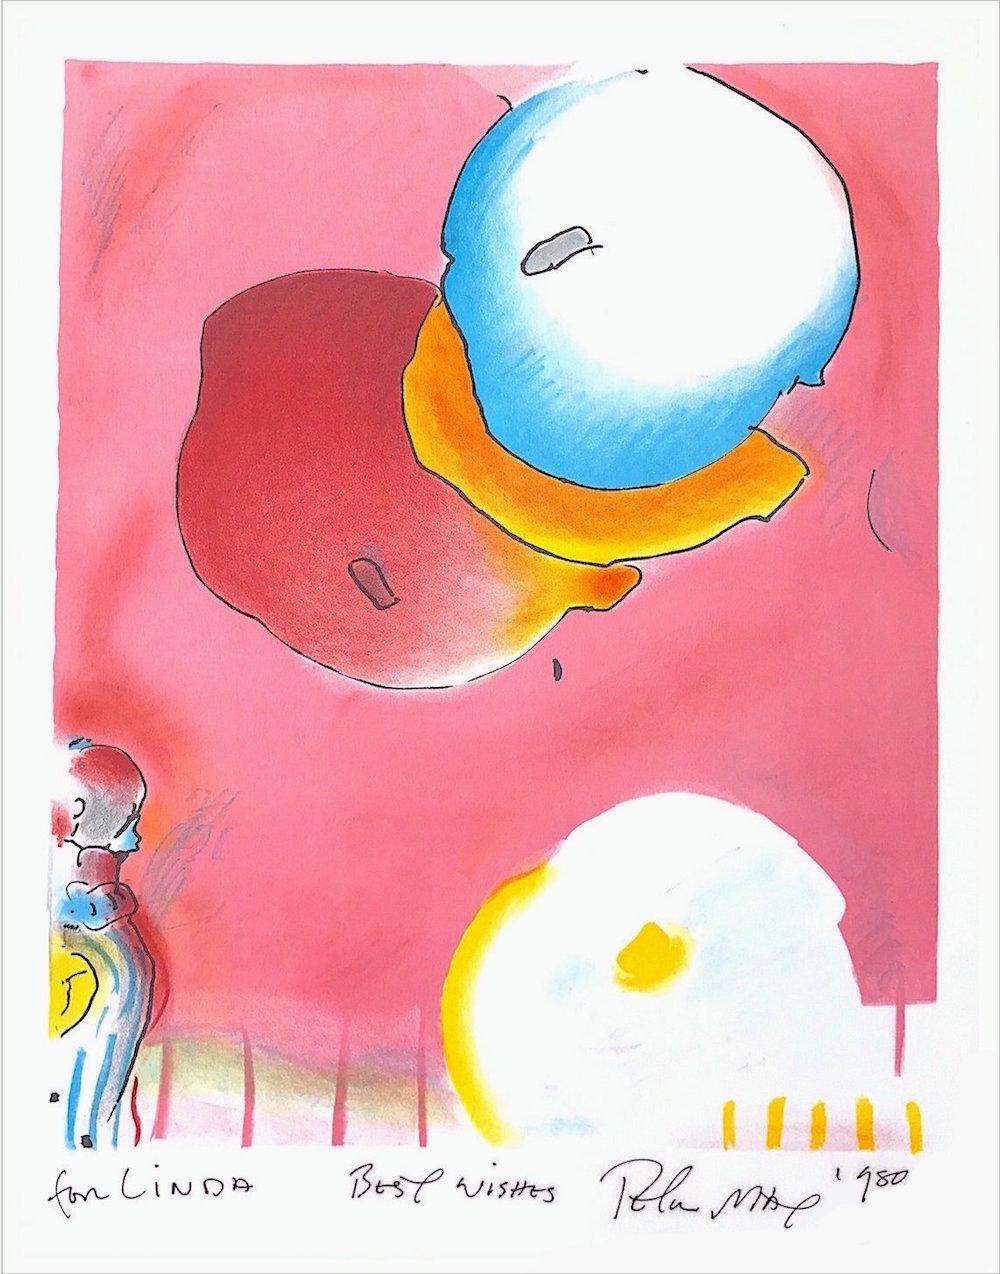 TWO FLOATING Signed Lithograph, Pop Art Abstract Balloons, Red Pink Blue Yellow